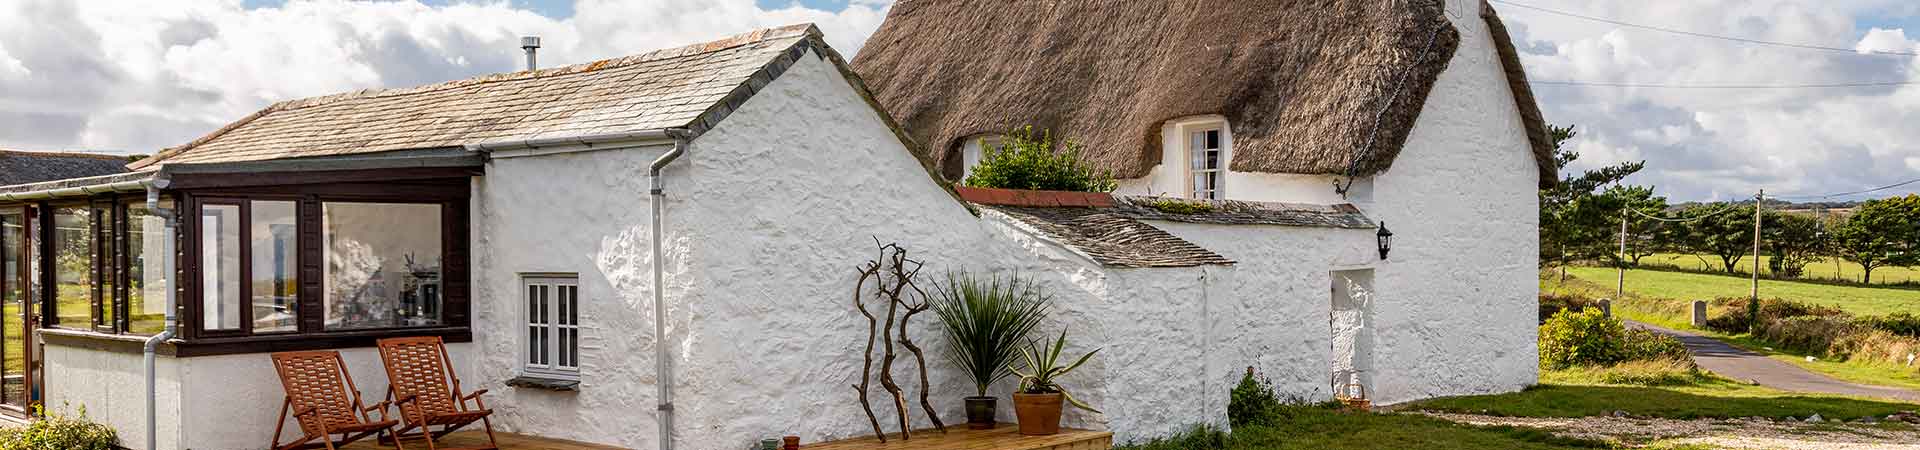 Thatched holiday cottages in North England